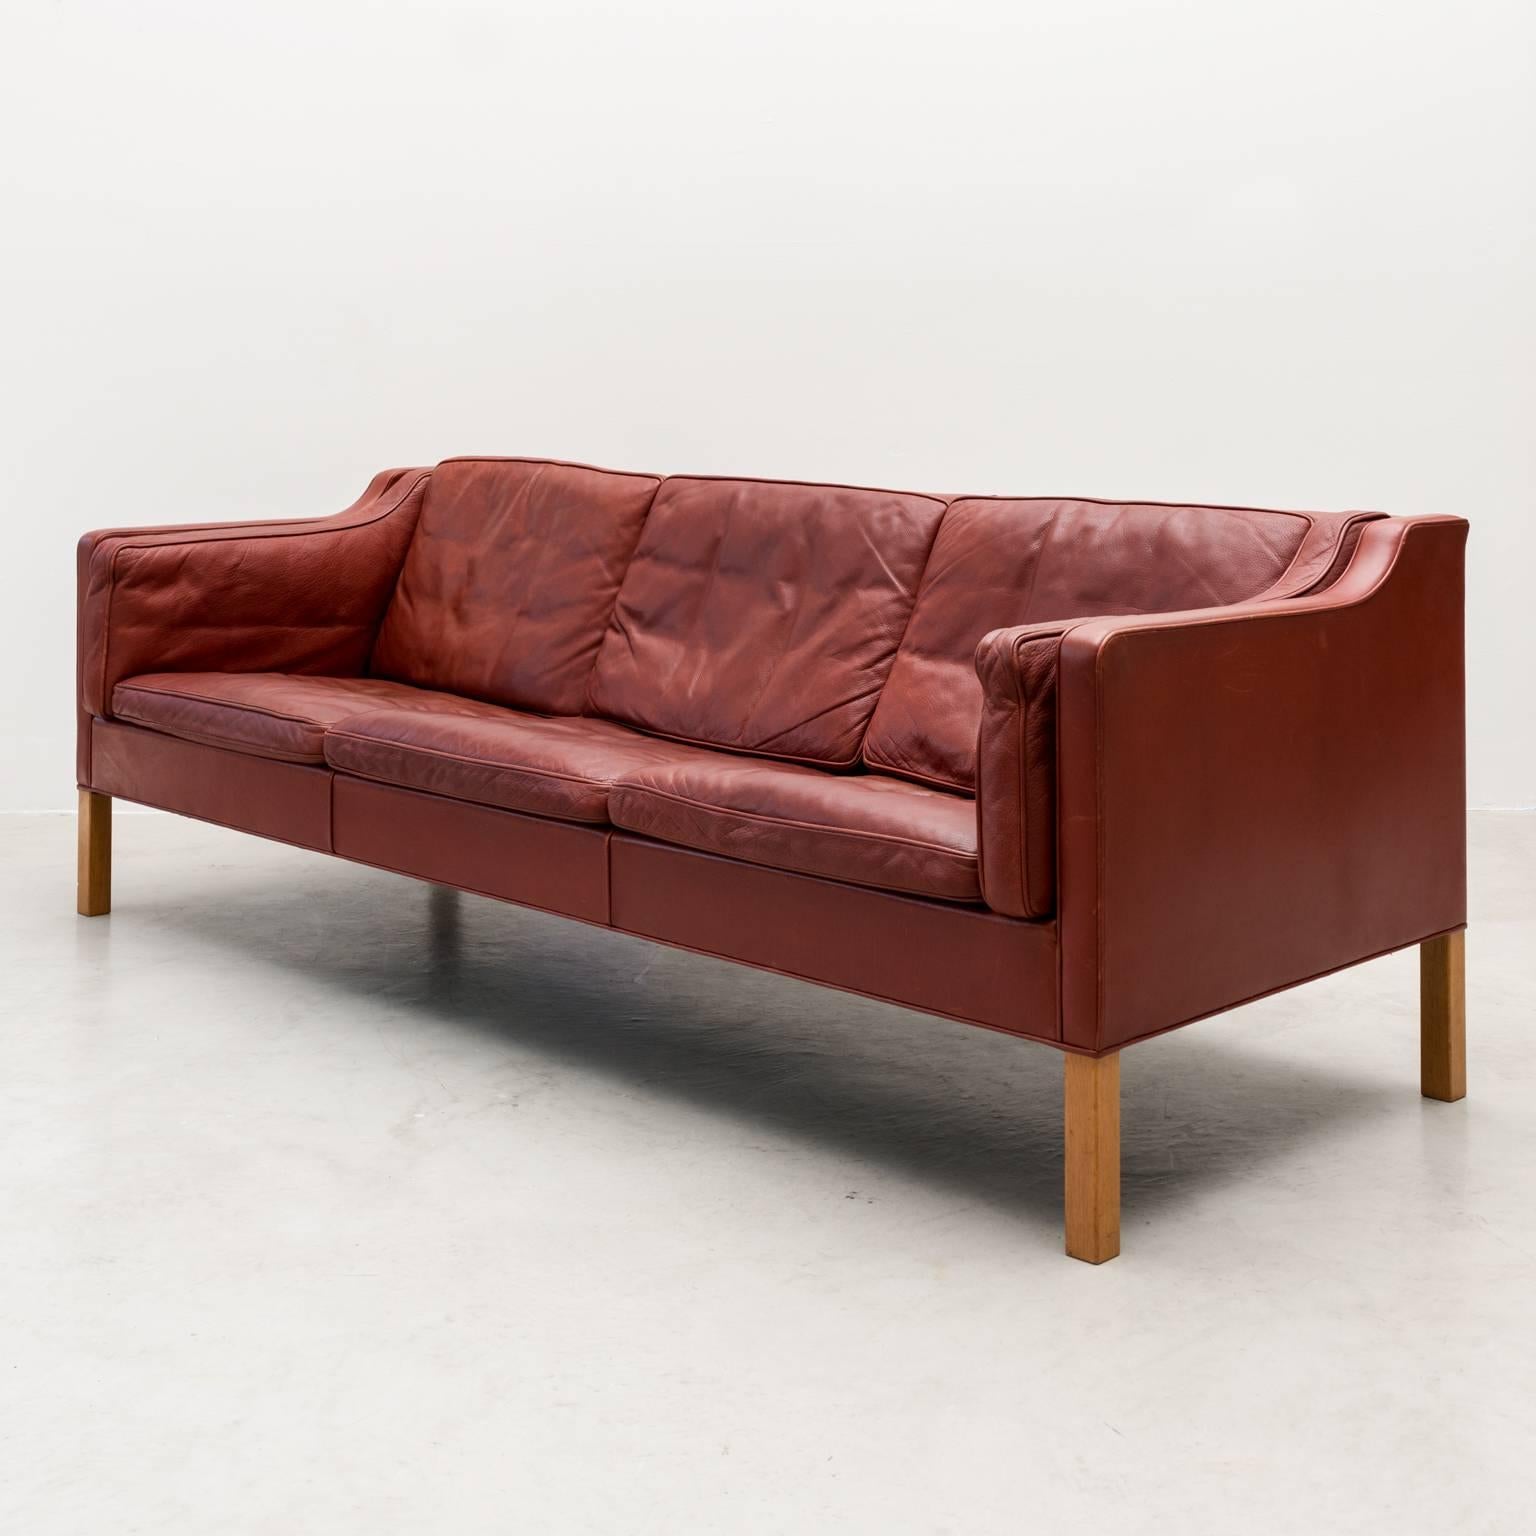 A lovely three-seat sofa model 2213 by Børge Mogensen for Fredericia. In cognac leather with oak legs, Denmark, 1962.